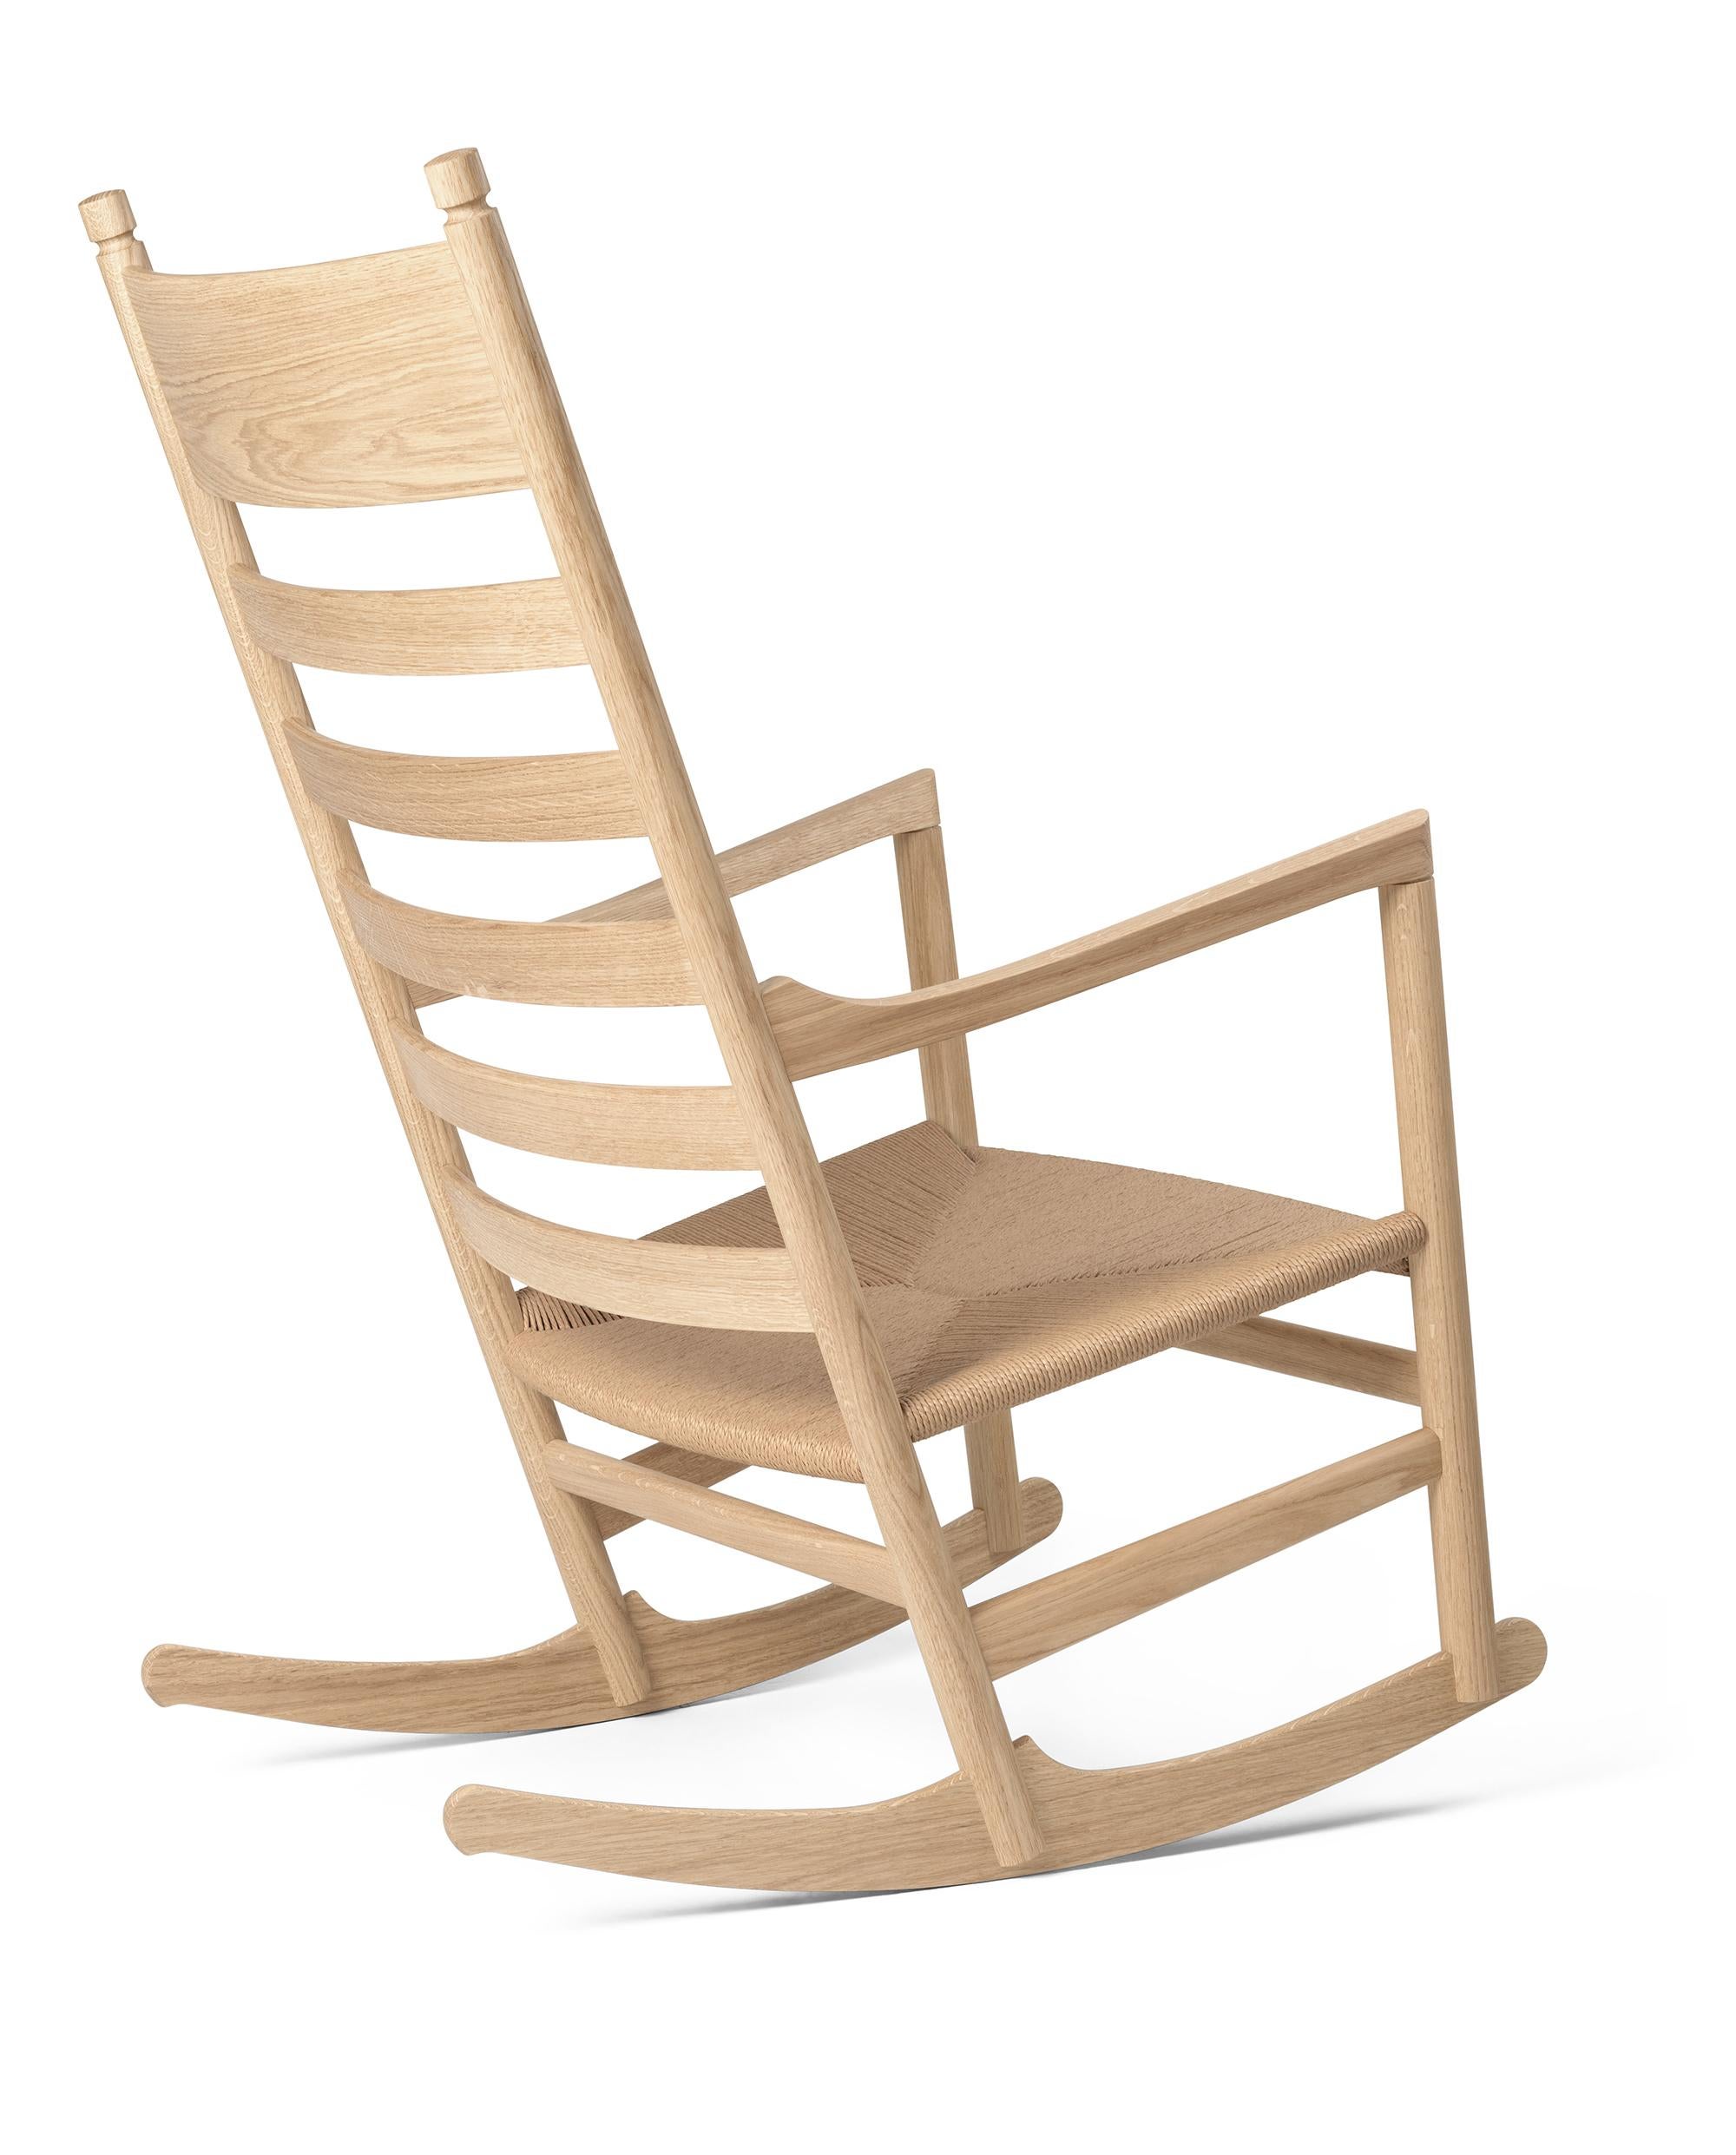 Hans J. Wegner 'CH45' Rocking Chair for Carl Hansen & Son in Oak Soap.

The story of Danish Modern begins in 1908 when Carl Hansen opened his first workshop. His firm commitment to beauty, comfort, refinement, and craftsmanship is evident in iconic